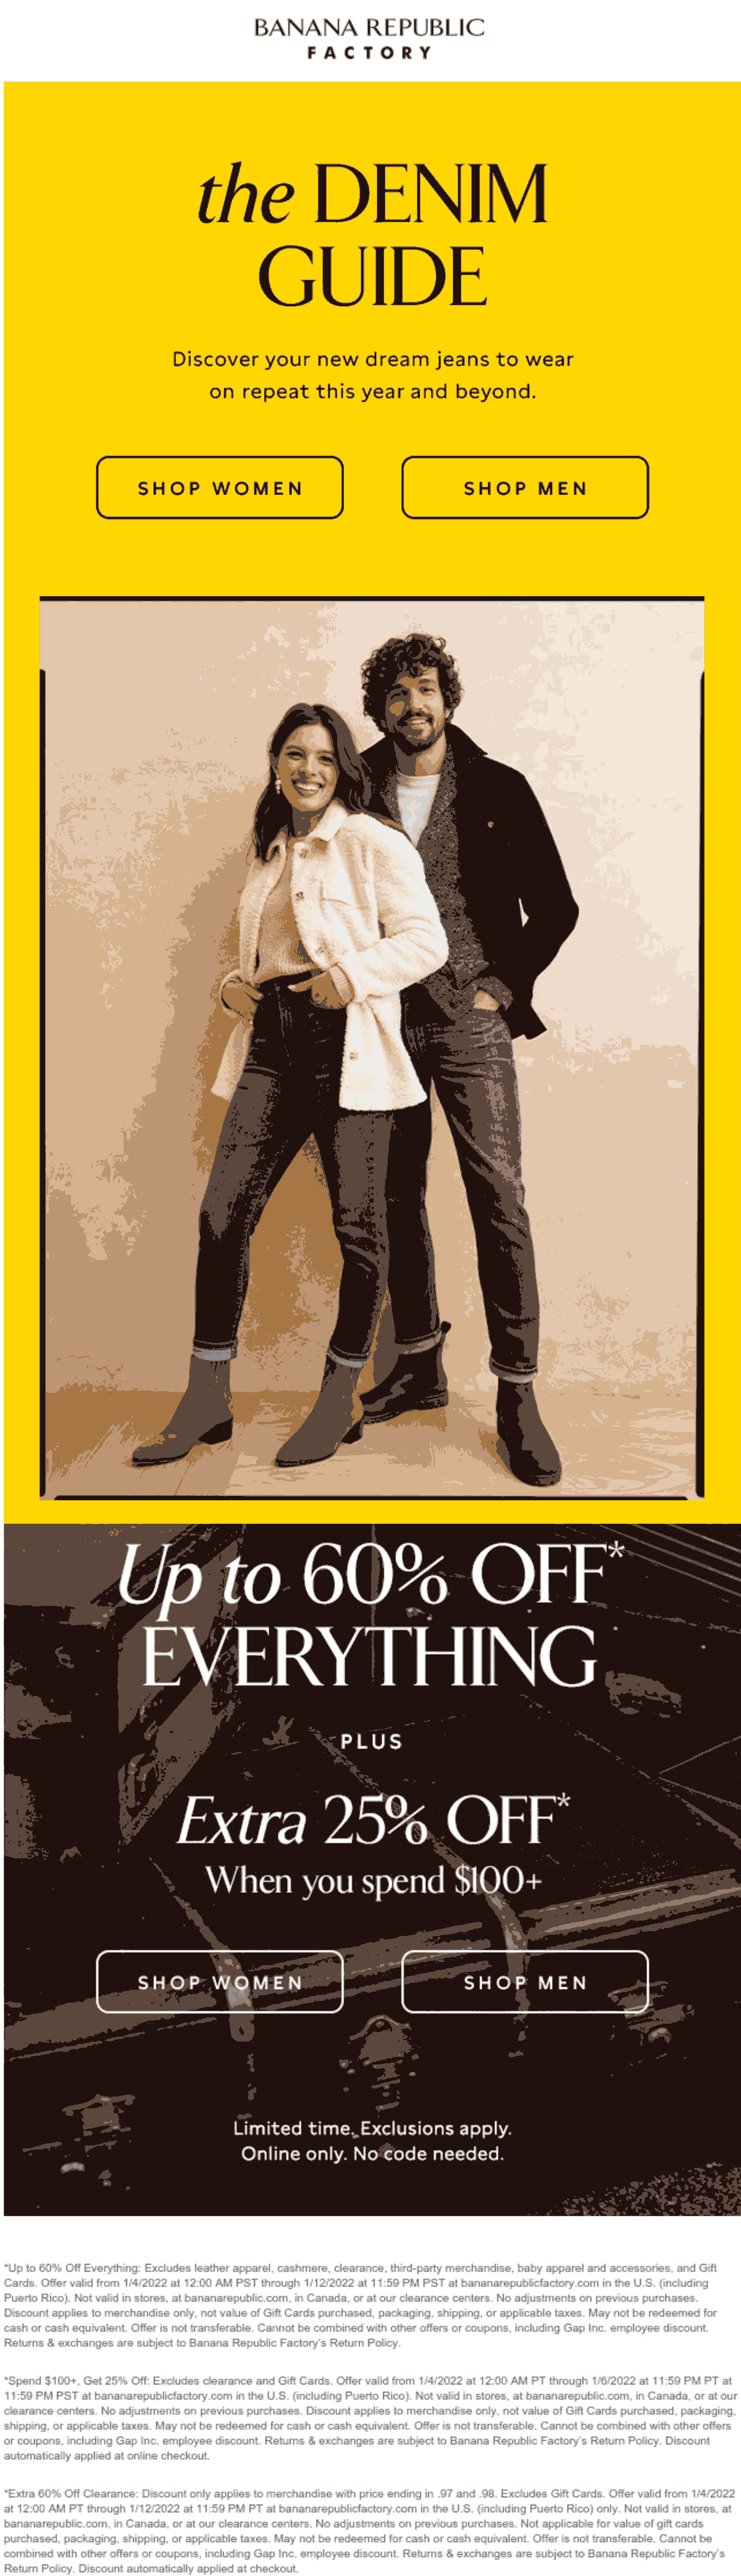 Extra 2585 off 100+ online at Banana Republic Factory 